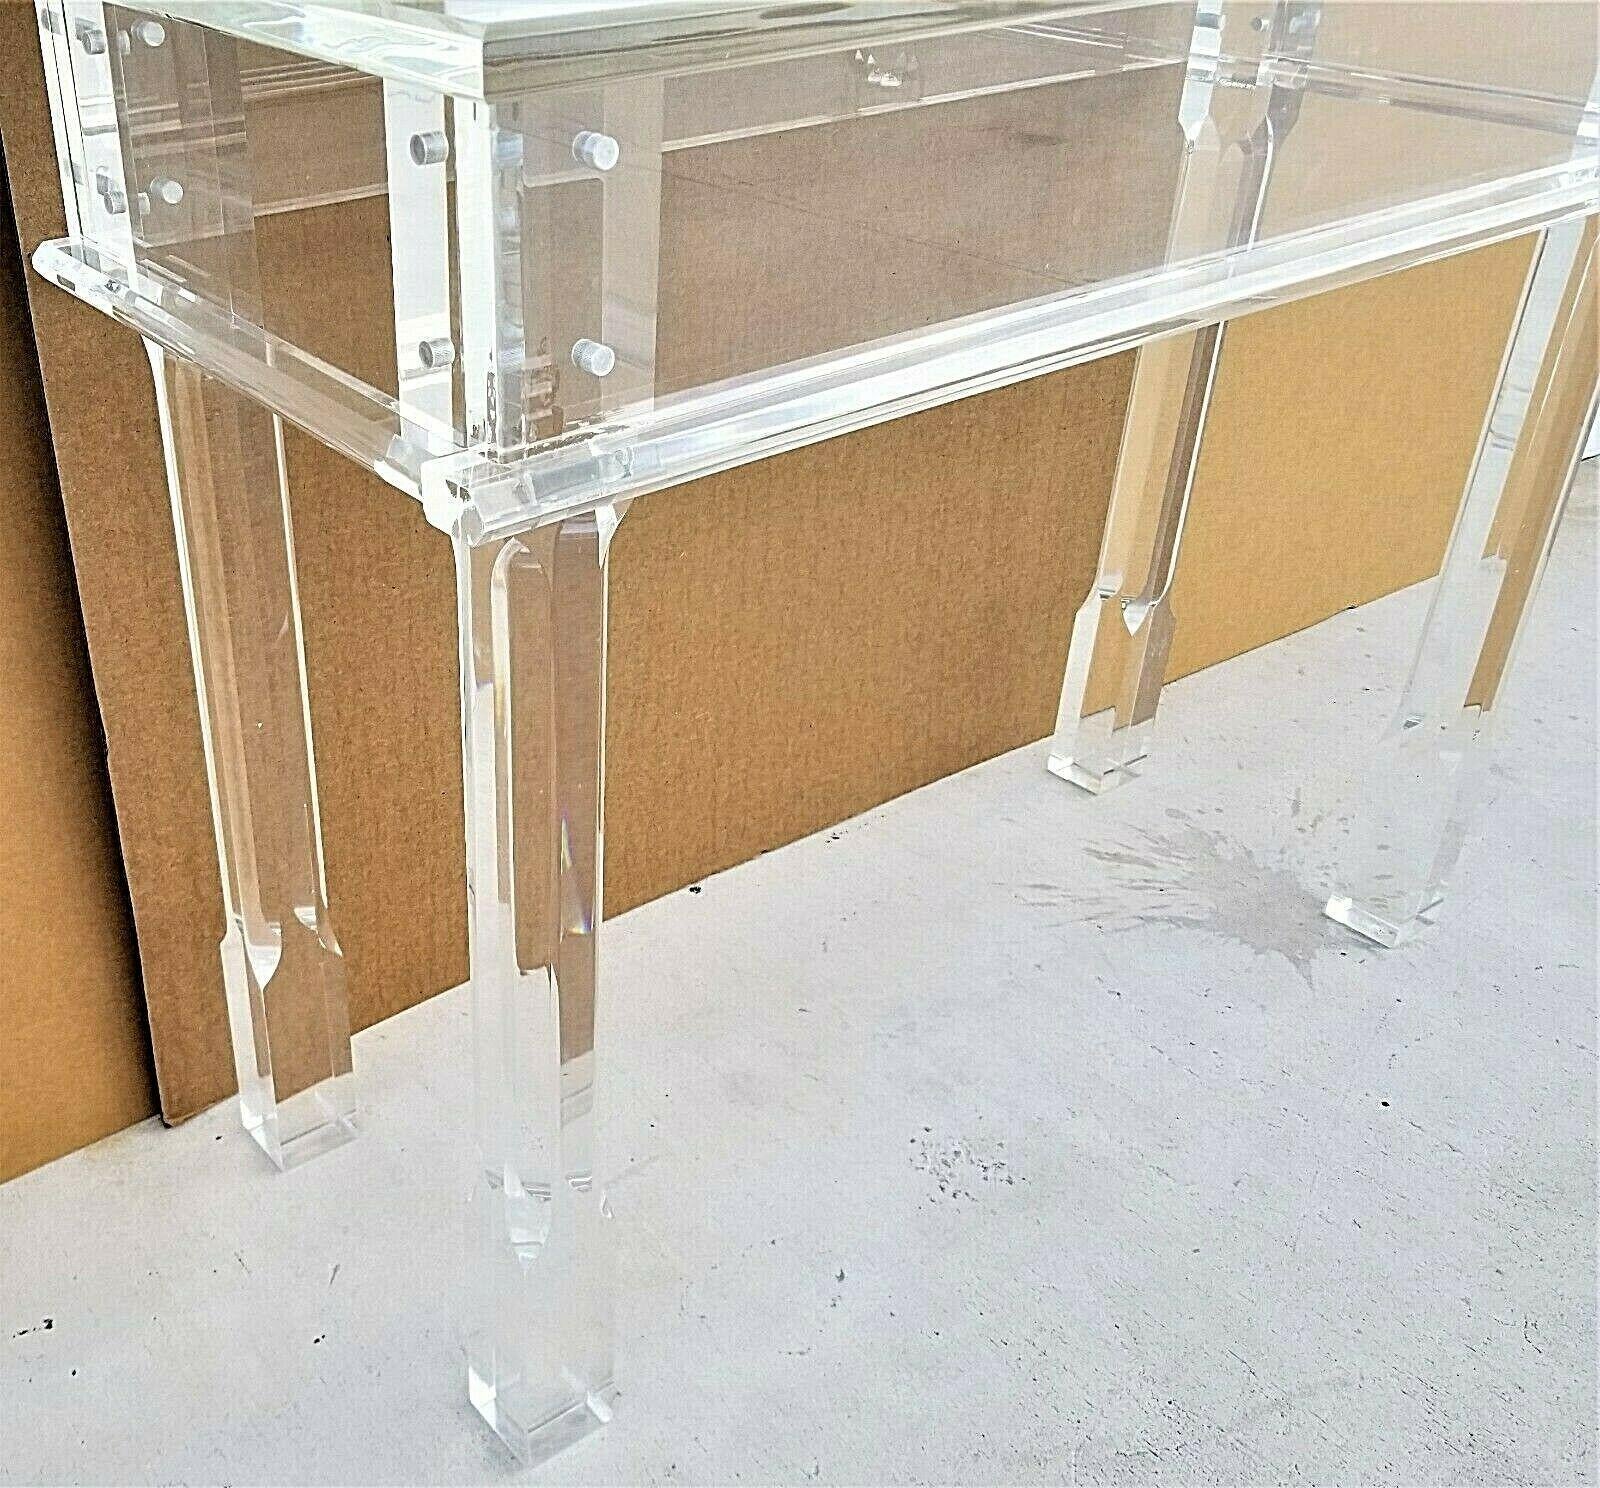 etagere with glass doors